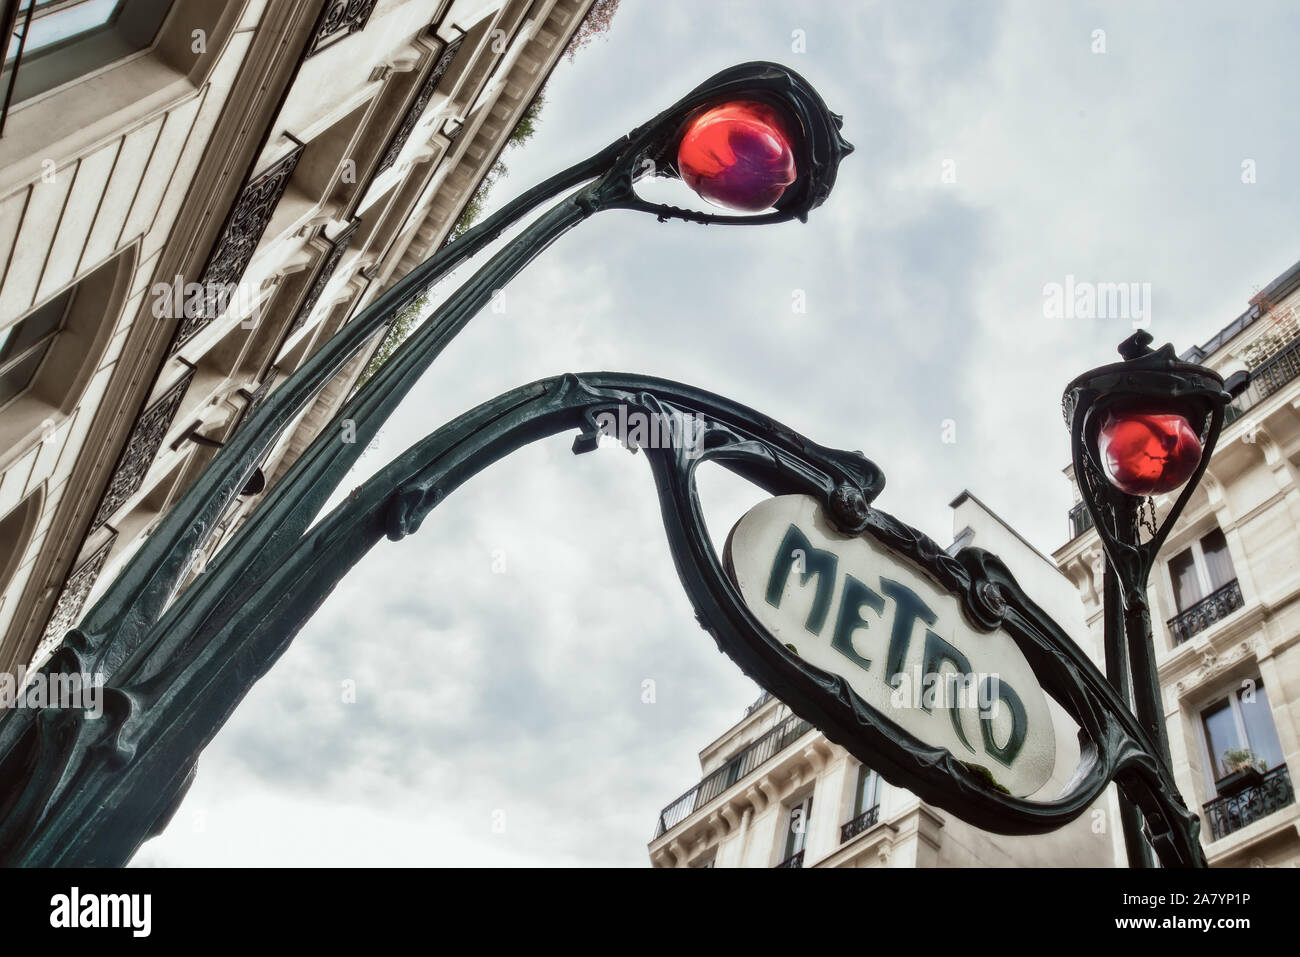 Entrance to the an underground station of the Paris Metro designed by Hector Guimard in Art Nouveau style, Paris France. Stock Photo